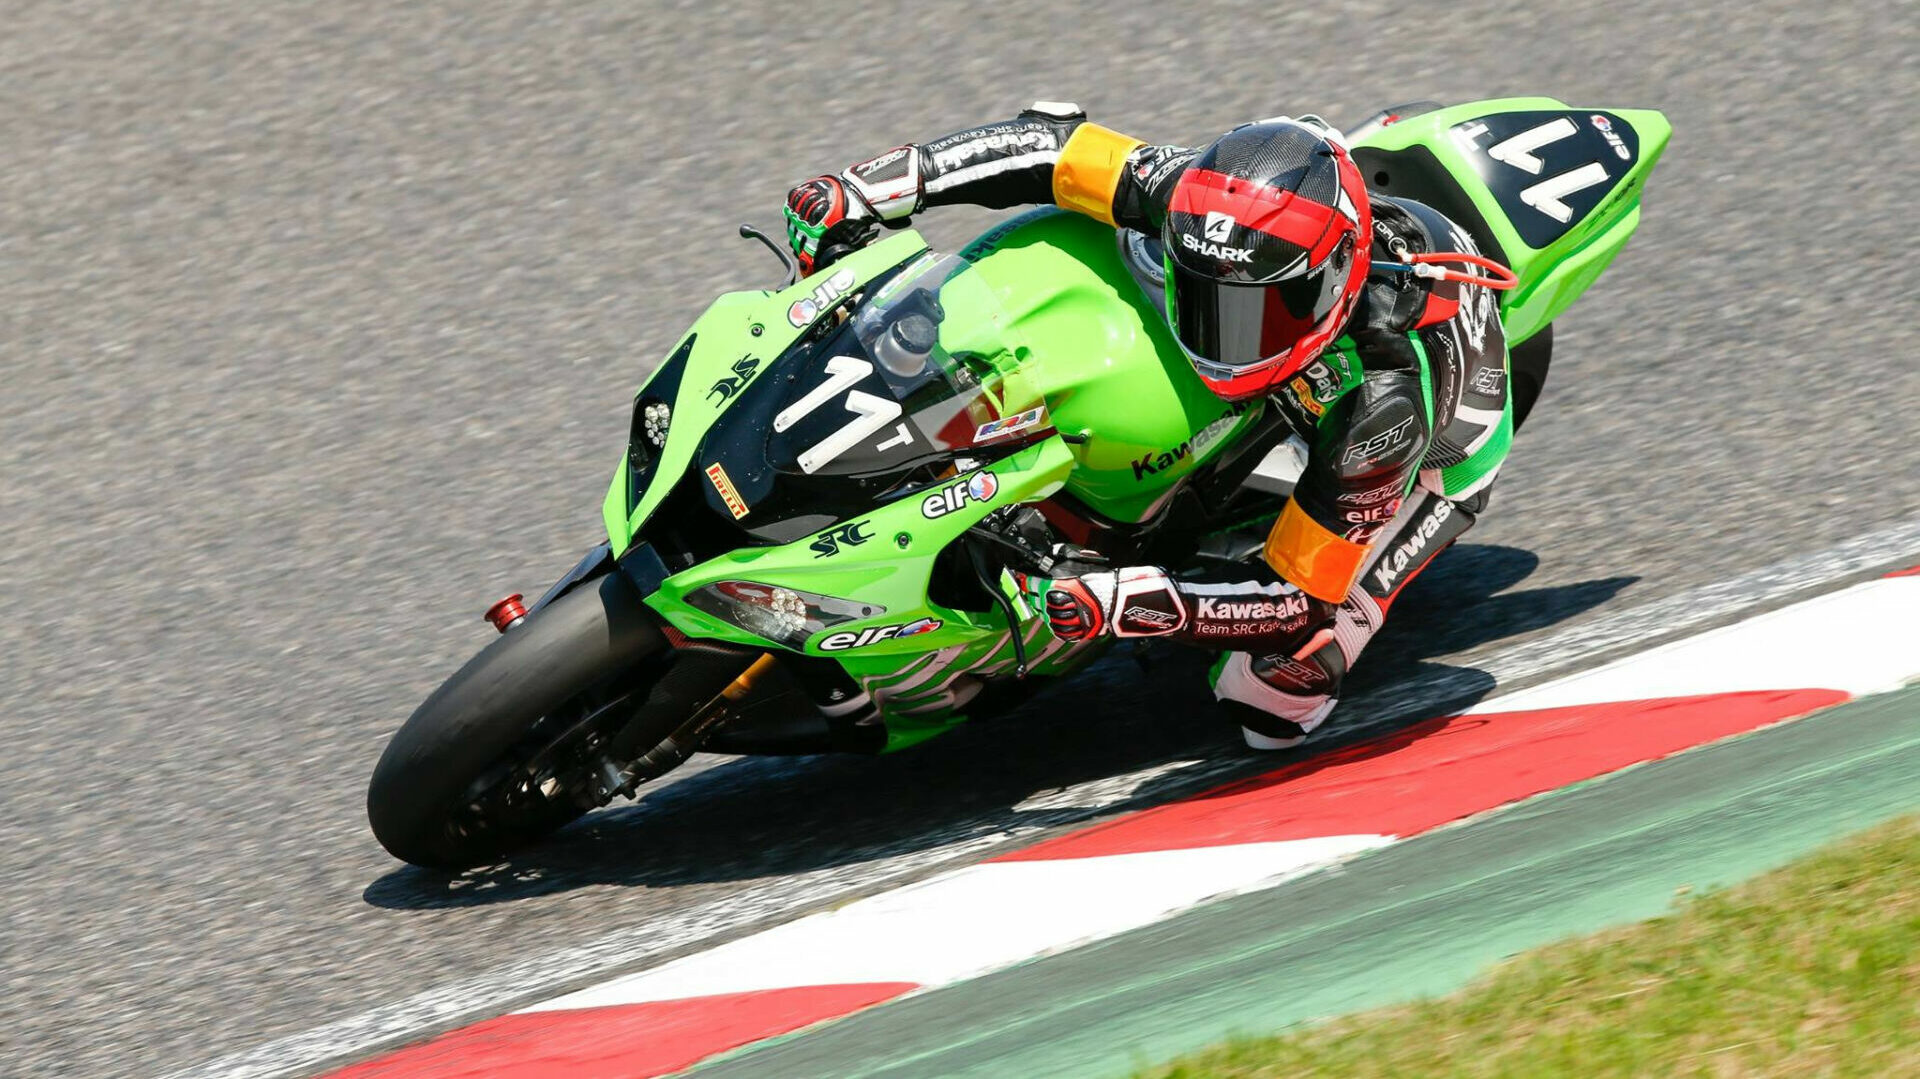 Matthieu Lagrive (11), as seen in 2016 when he co-rode the SRC Kawasaki to the Le Mans 24-Hour race victory. Photo courtesy SRC Kawasaki.